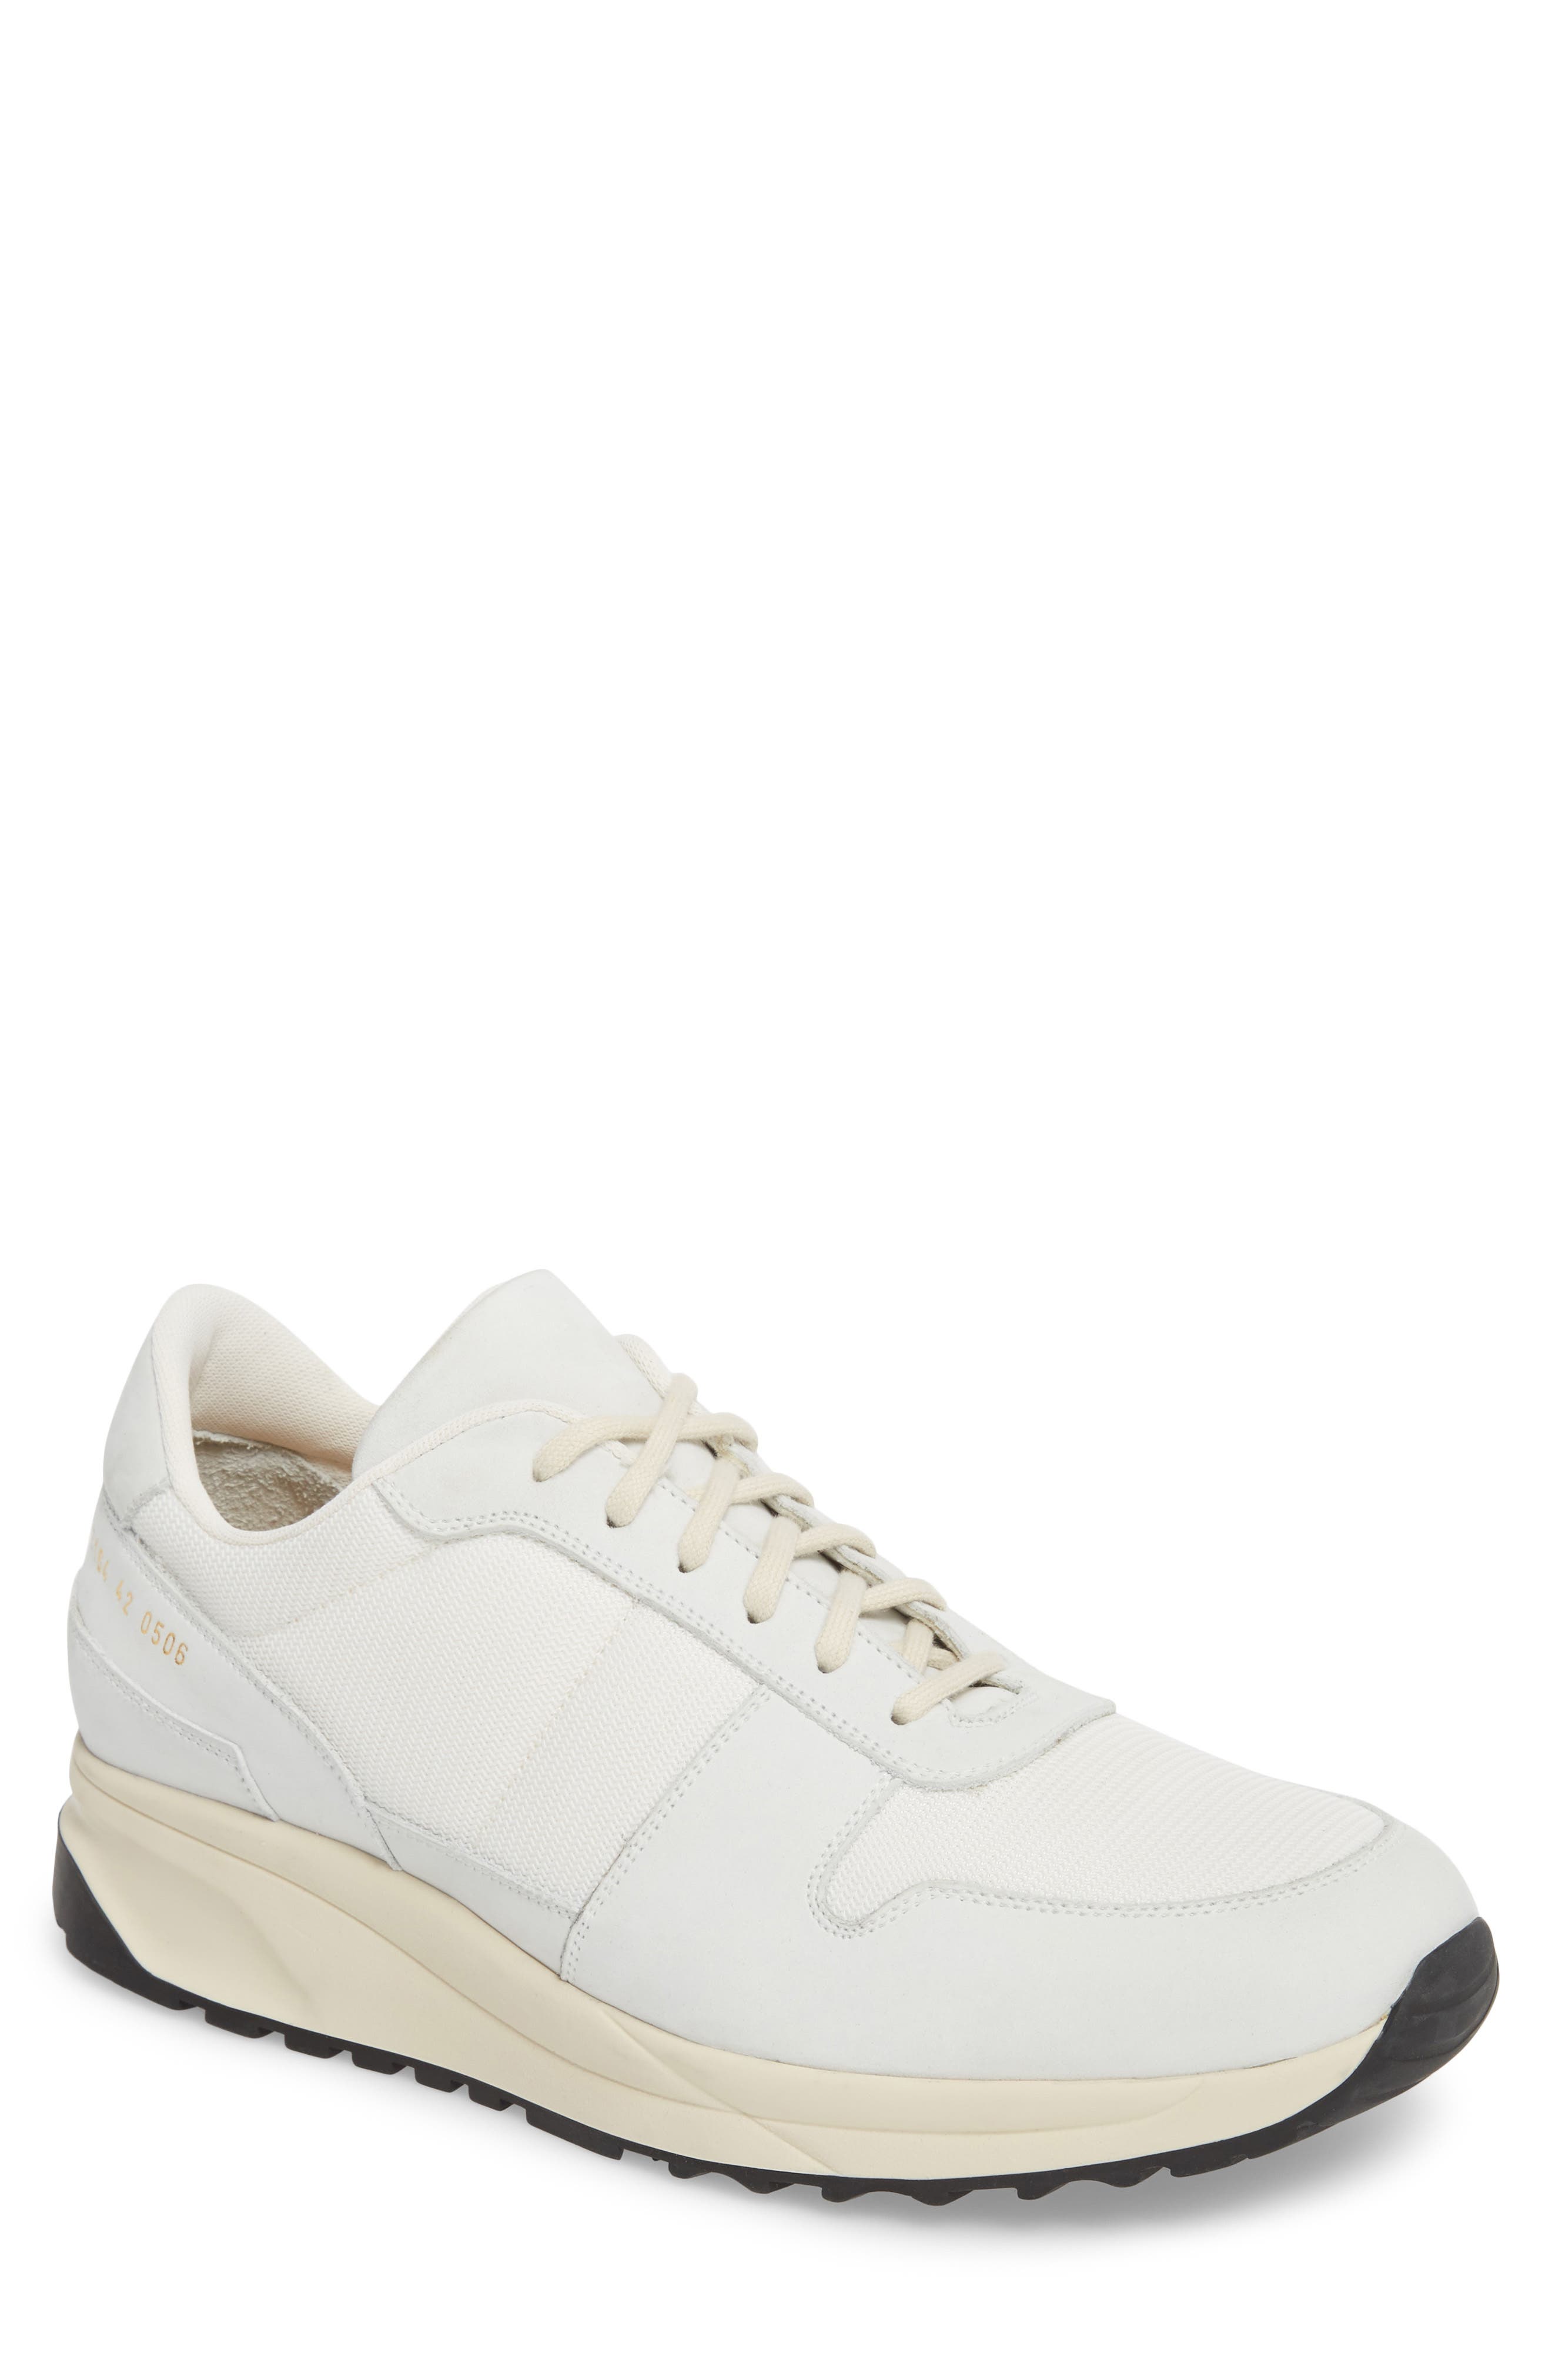 Common Projects Track Vintage Sneaker 